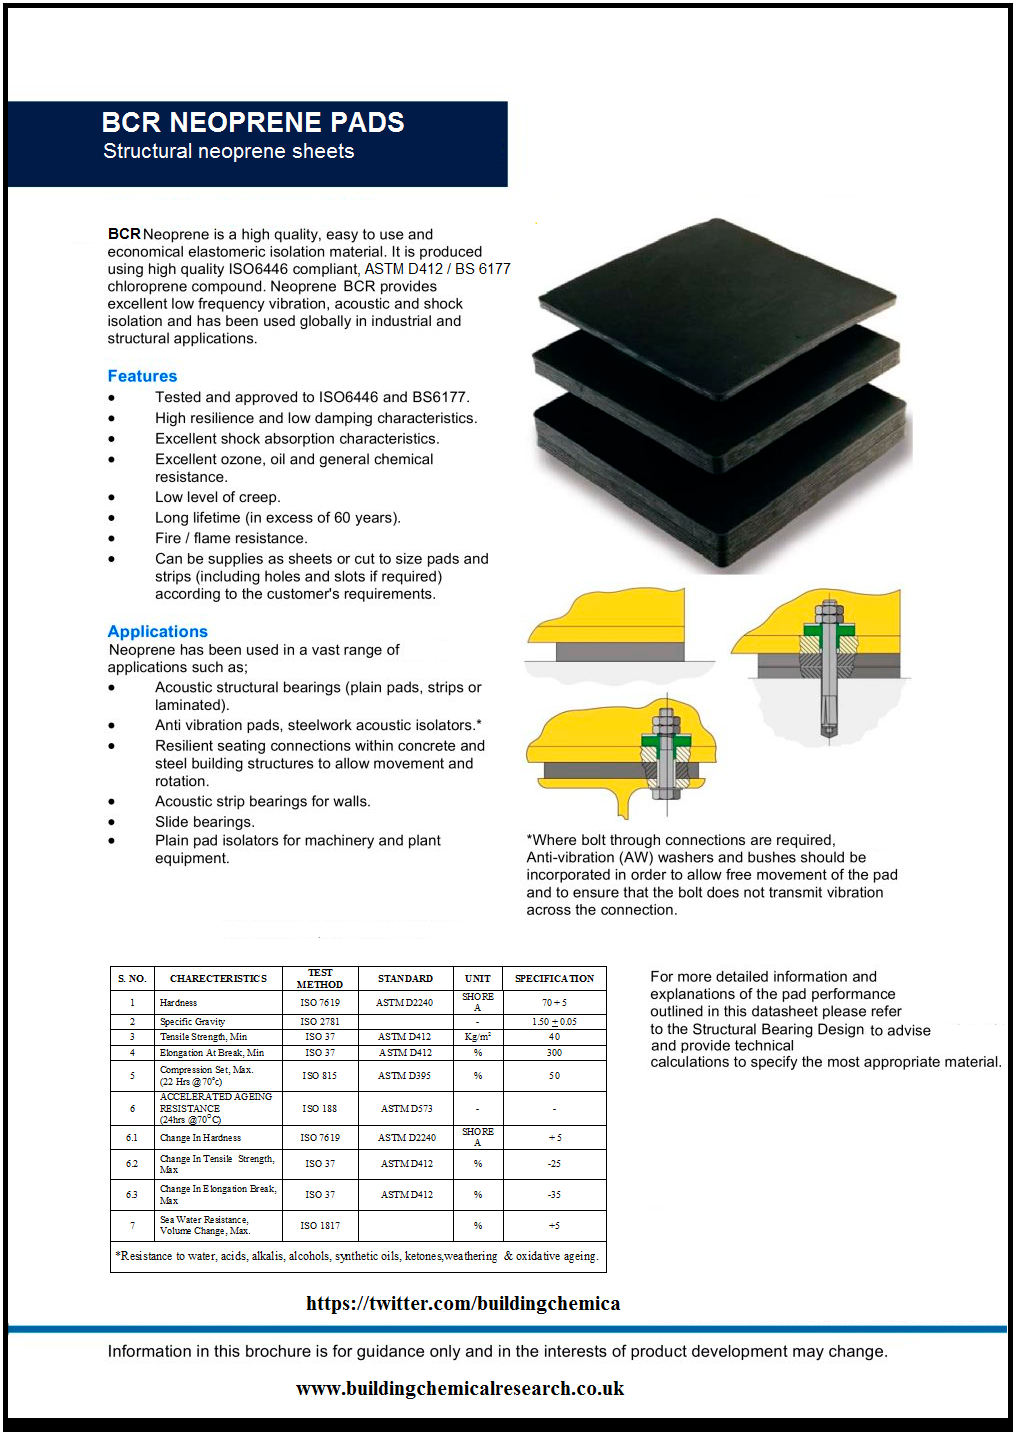 BCR NEOPRENE PAD FOR STRUCTURAL USE